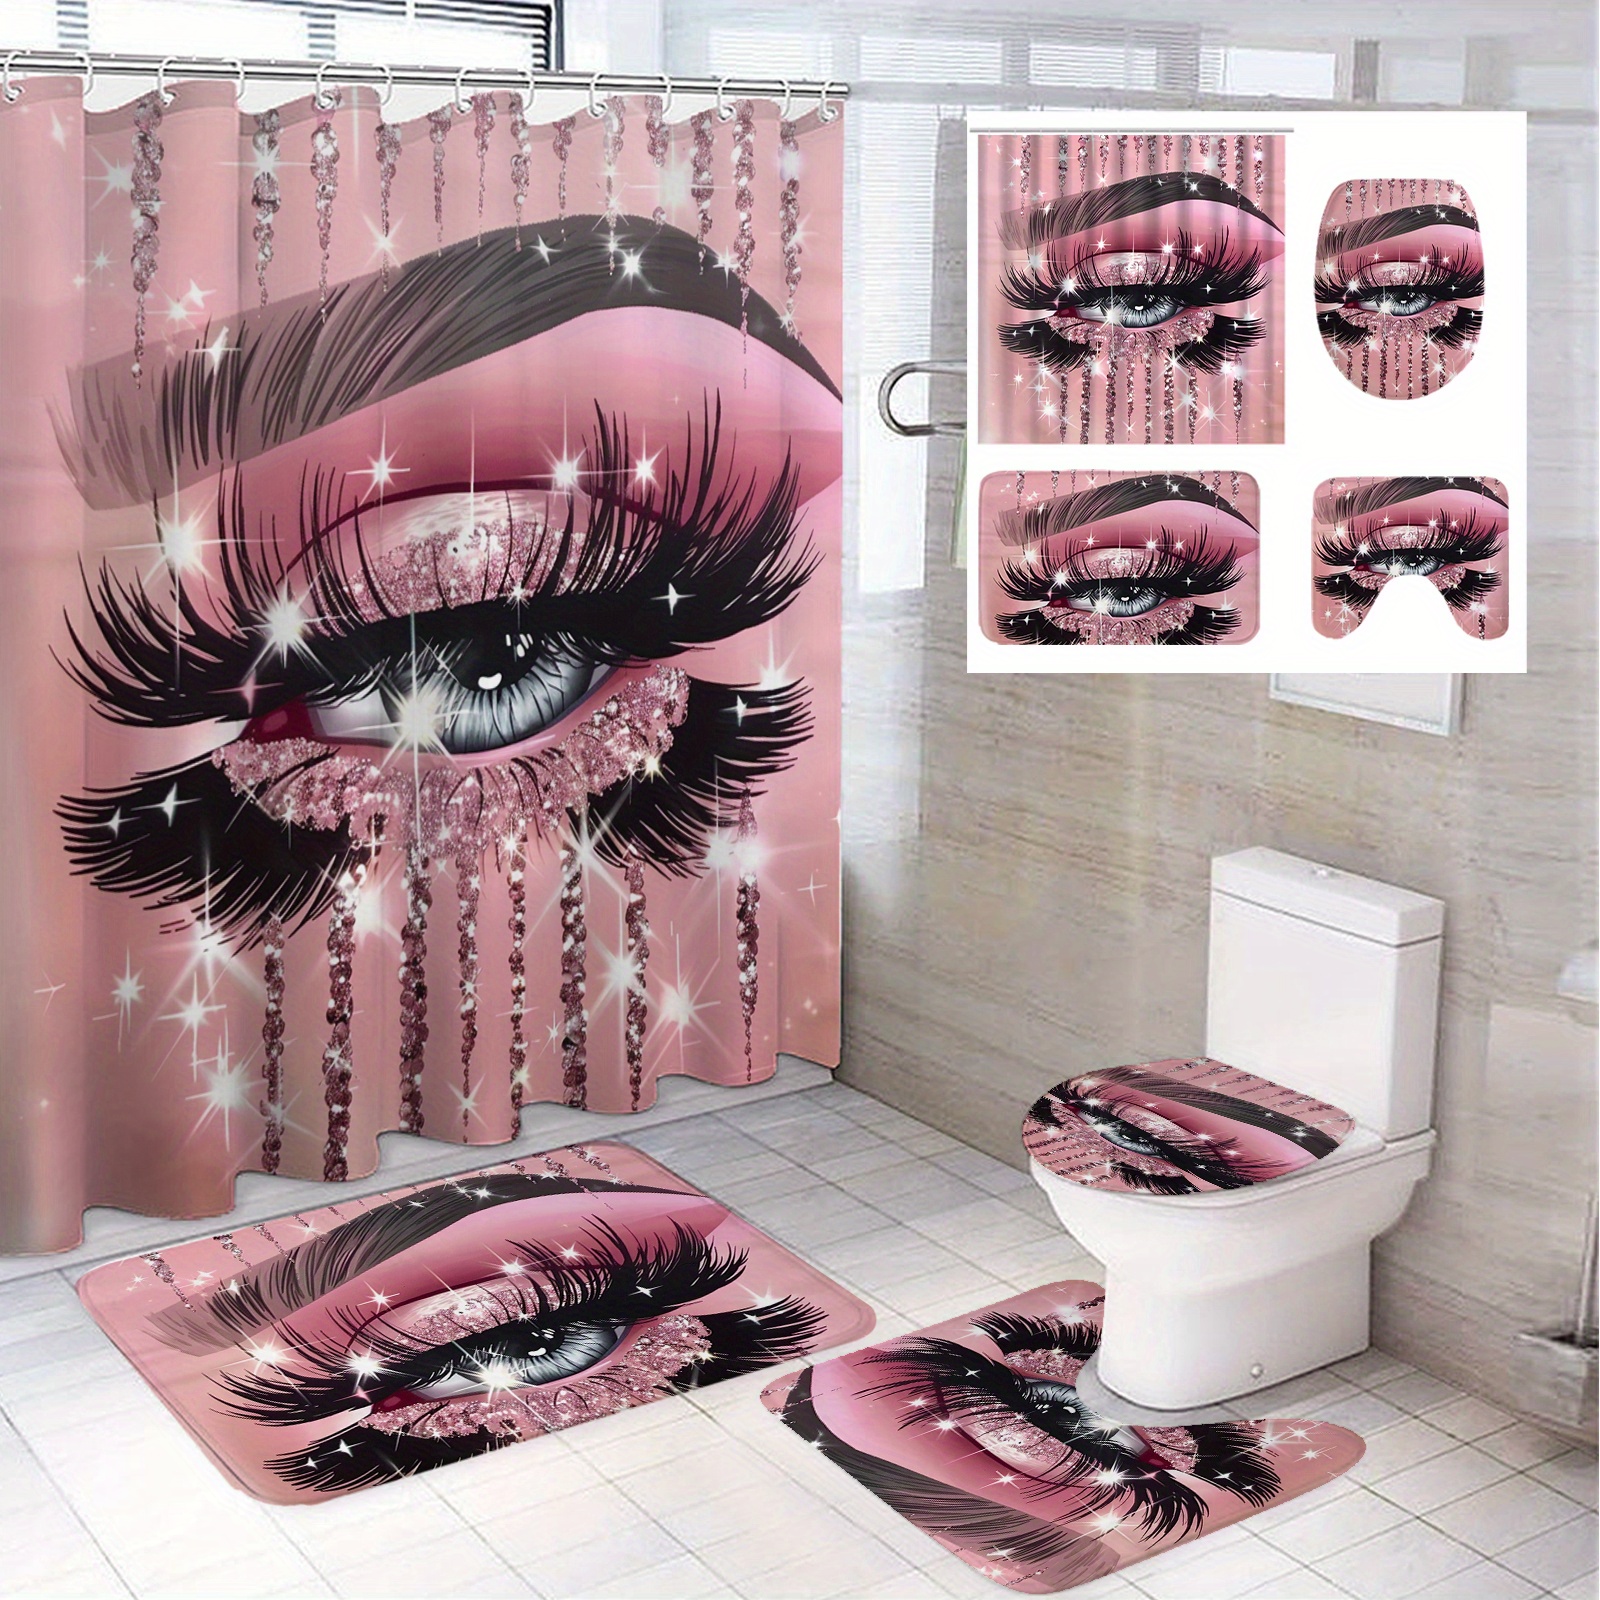 

1/4pcs Pink Abstract Eye Art Pattern Modern Bathroom Decor, Polyester Bathroom Set With 12 Hooks, Bathroom Non-slip Mat, Toilet Seat Cover And U-shaped Mat Home Decor 71*71in